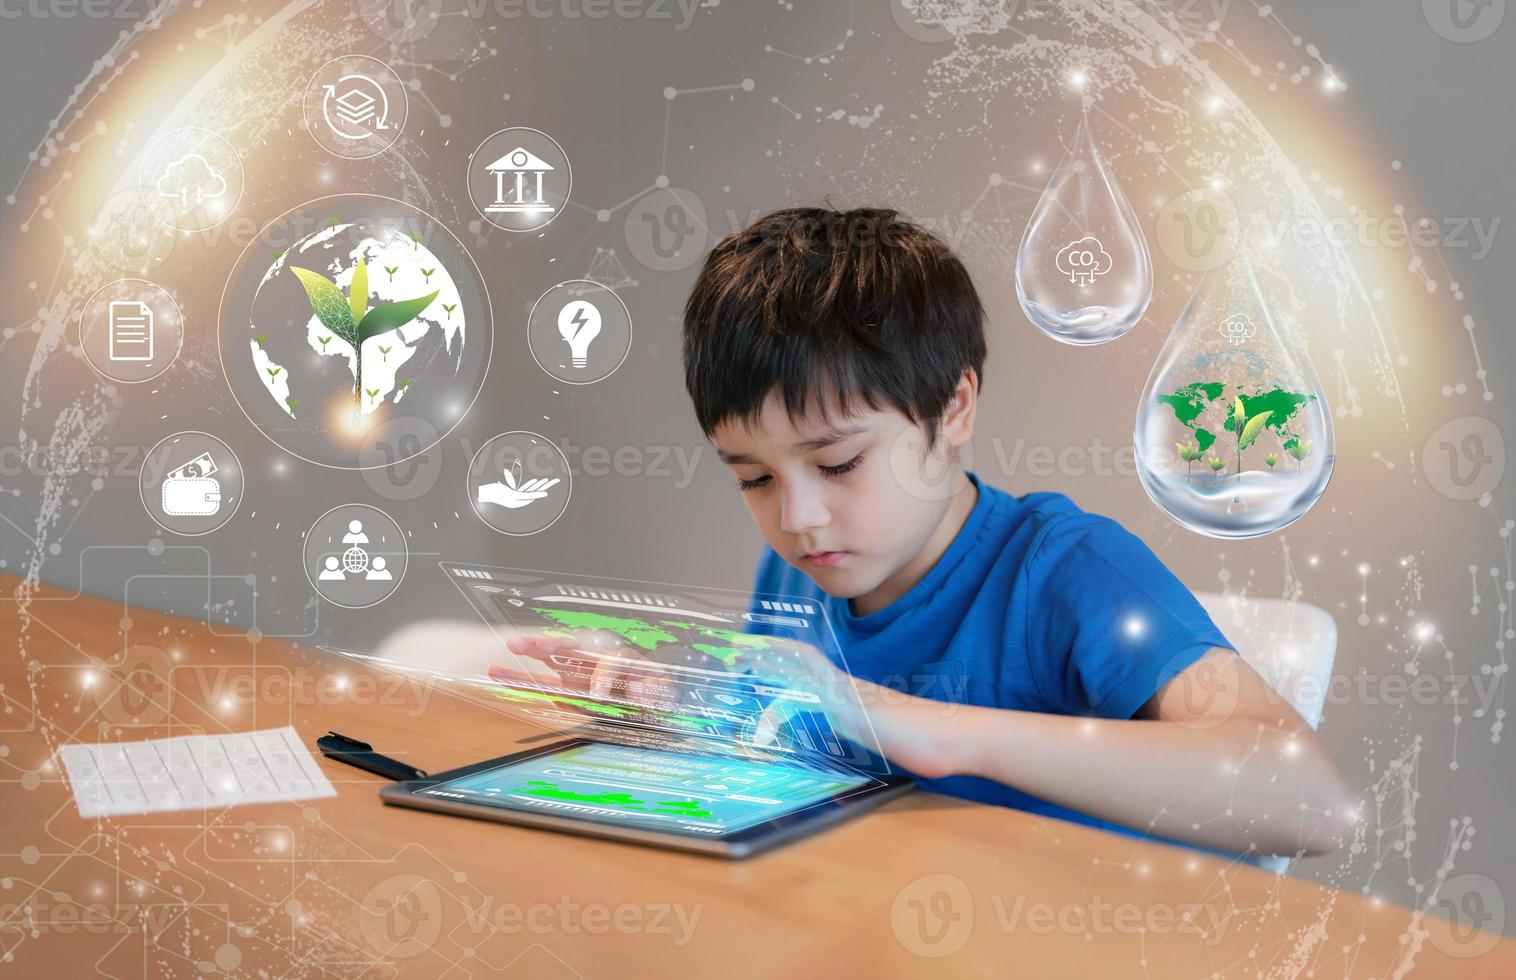 Education technology,Kid using tablet research on internet about world population,Ecology,Environmental,School Boy doing online learning,Geography with Double exposure growth leaf on globe map photo